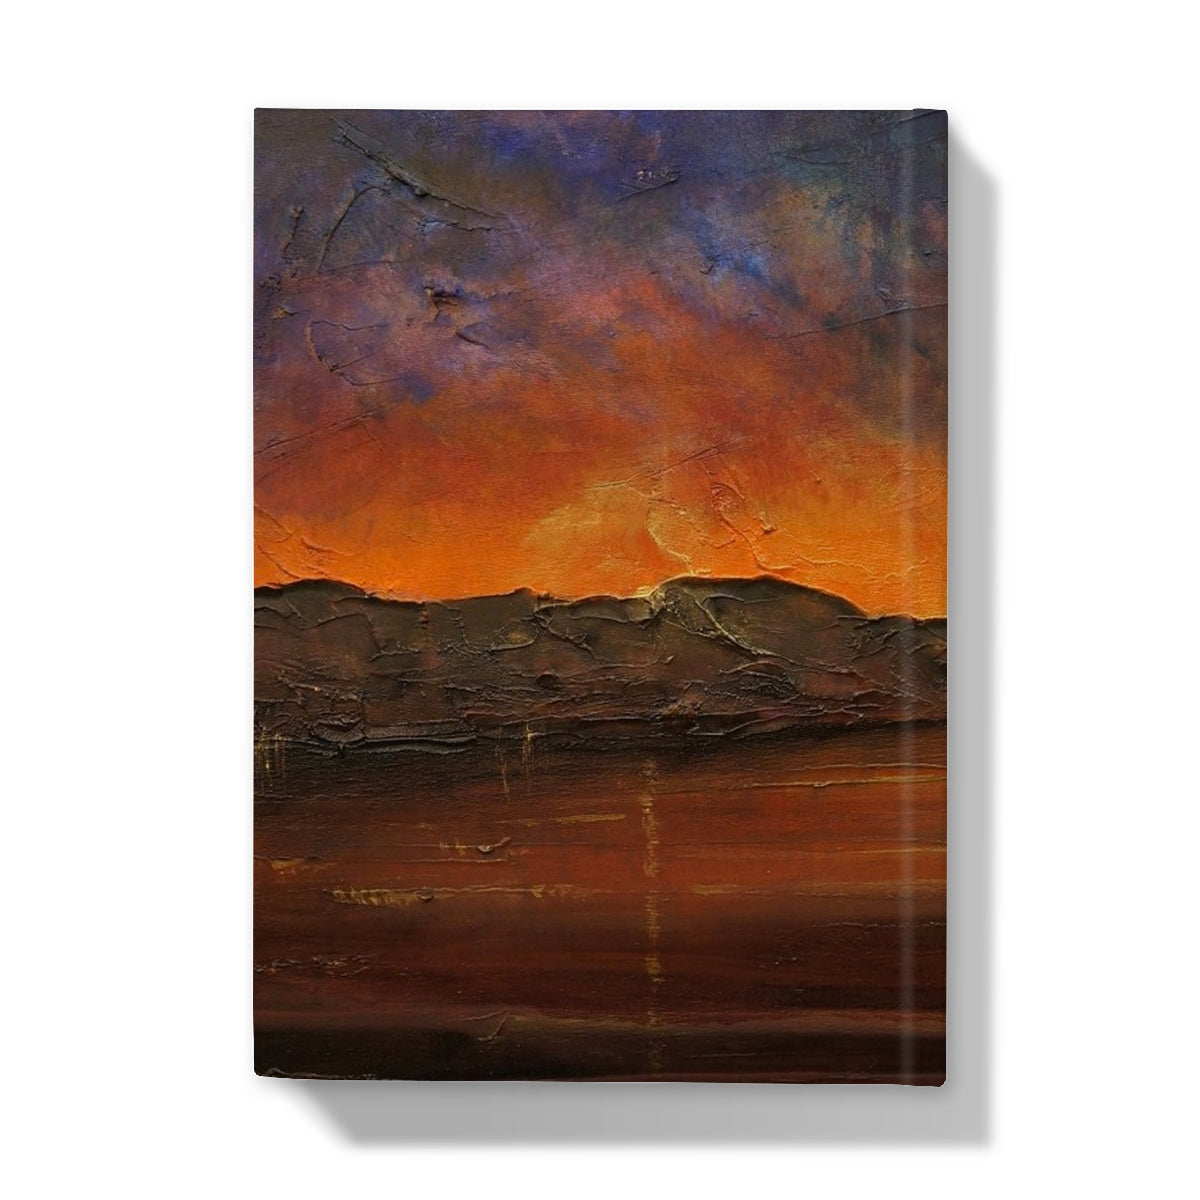 A Brooding Clyde Dusk Art Gifts Hardback Journal-Journals & Notebooks-River Clyde Art Gallery-Paintings, Prints, Homeware, Art Gifts From Scotland By Scottish Artist Kevin Hunter